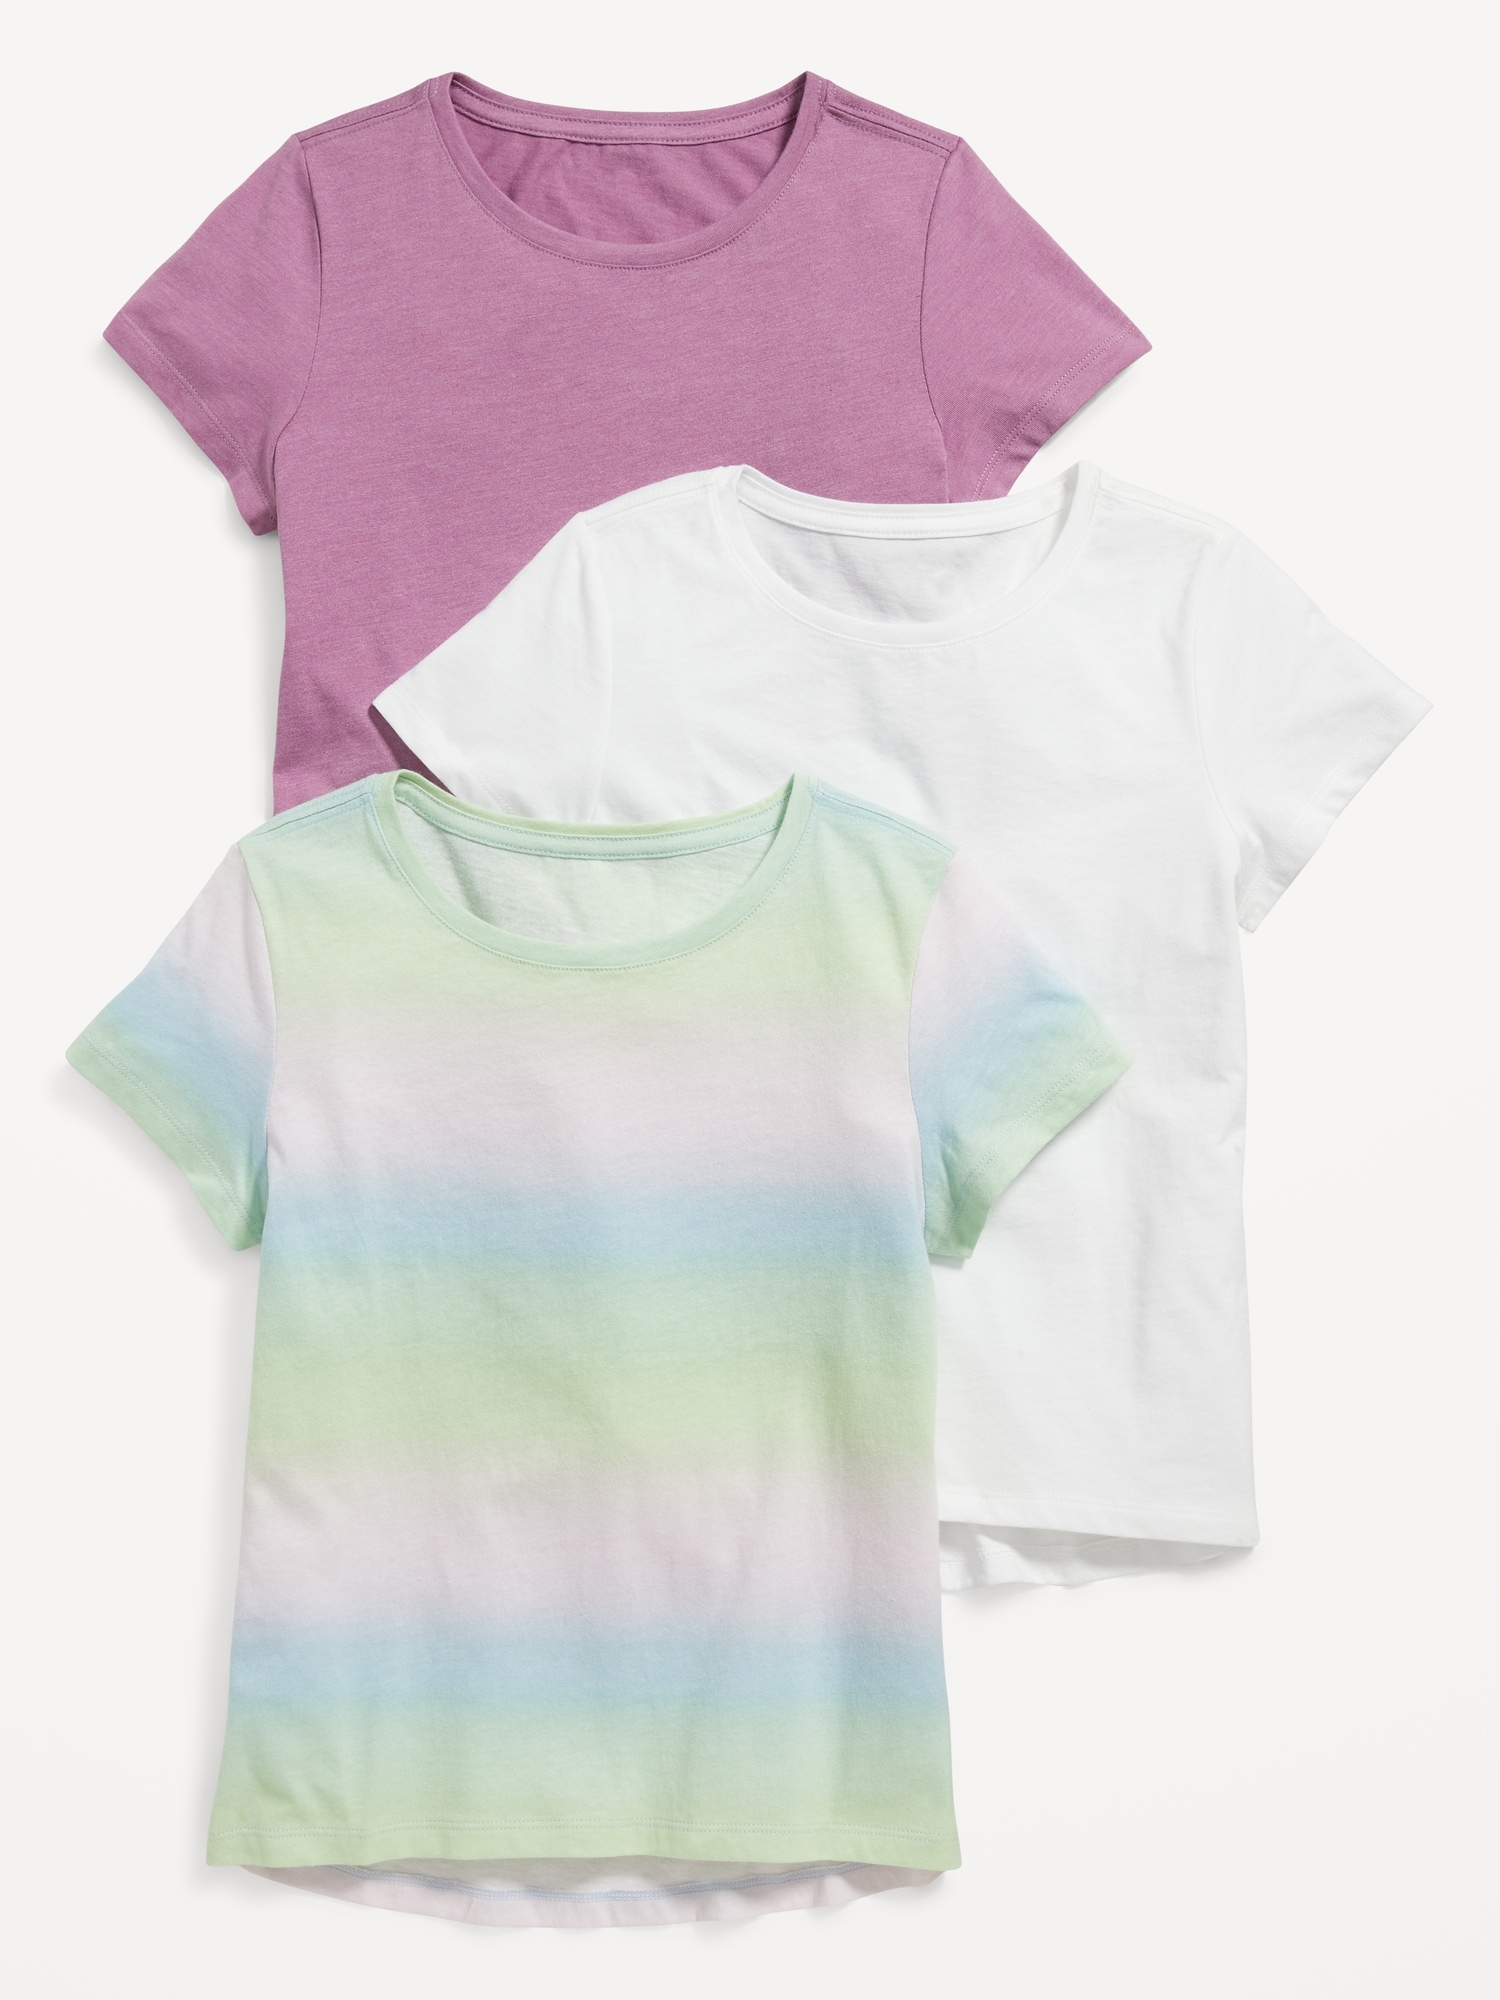 Softest Printed T-Shirt 3-Pack for Girls - what to bring to summer camp for kids